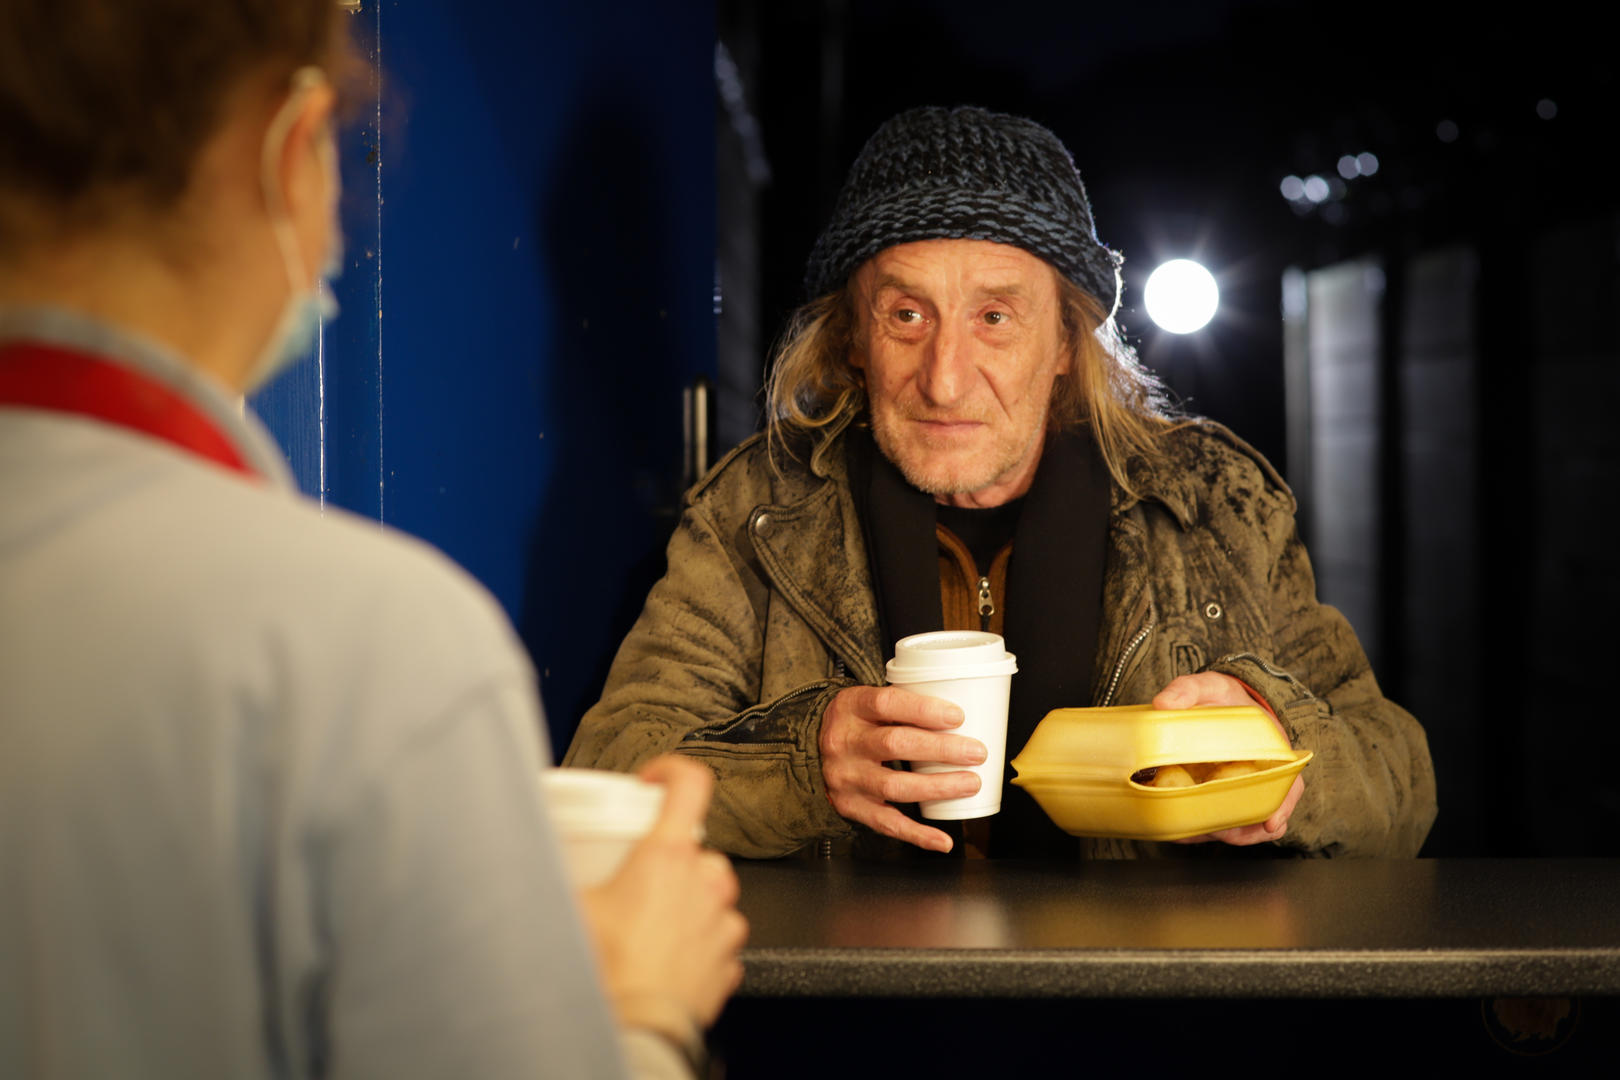 Hot meals for the homeless